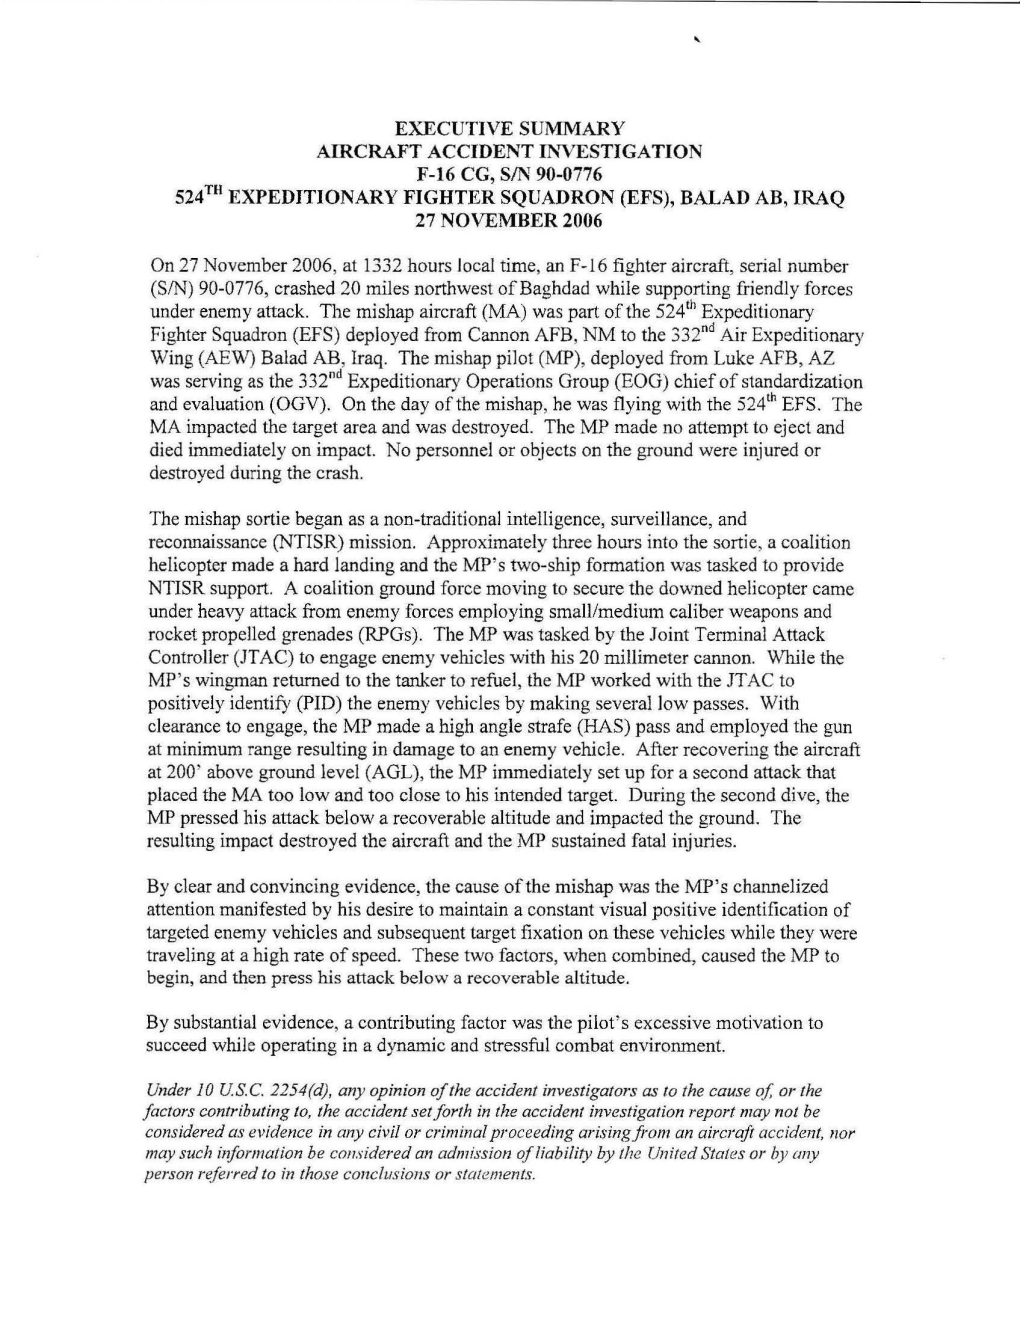 EXECUTIVE SUMMARY AIRCRAFT ACCIDENT Thtvestigation F-16 CG, SIN 90-0776 524TH EXPEDITIONARY FIGHTER SQUADRON (EFS), BALAD AB, IRAQ 27 NOVEMBER 2006